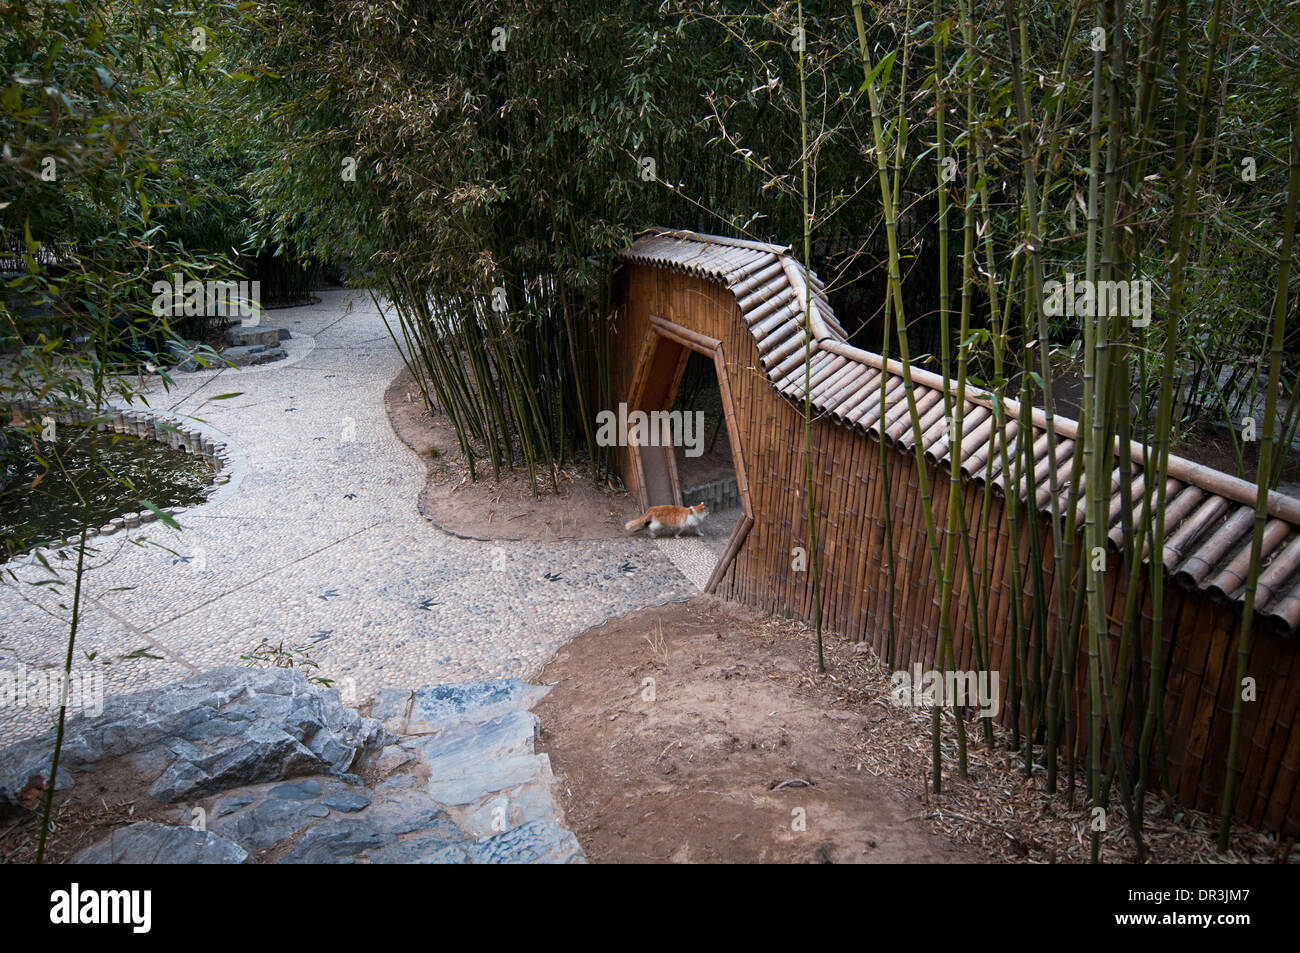 bamboo gate in Zizhuyuan Park commonly known as Purple or Black Bamboo Park in Haidian District, Beijing, China Stock Photo